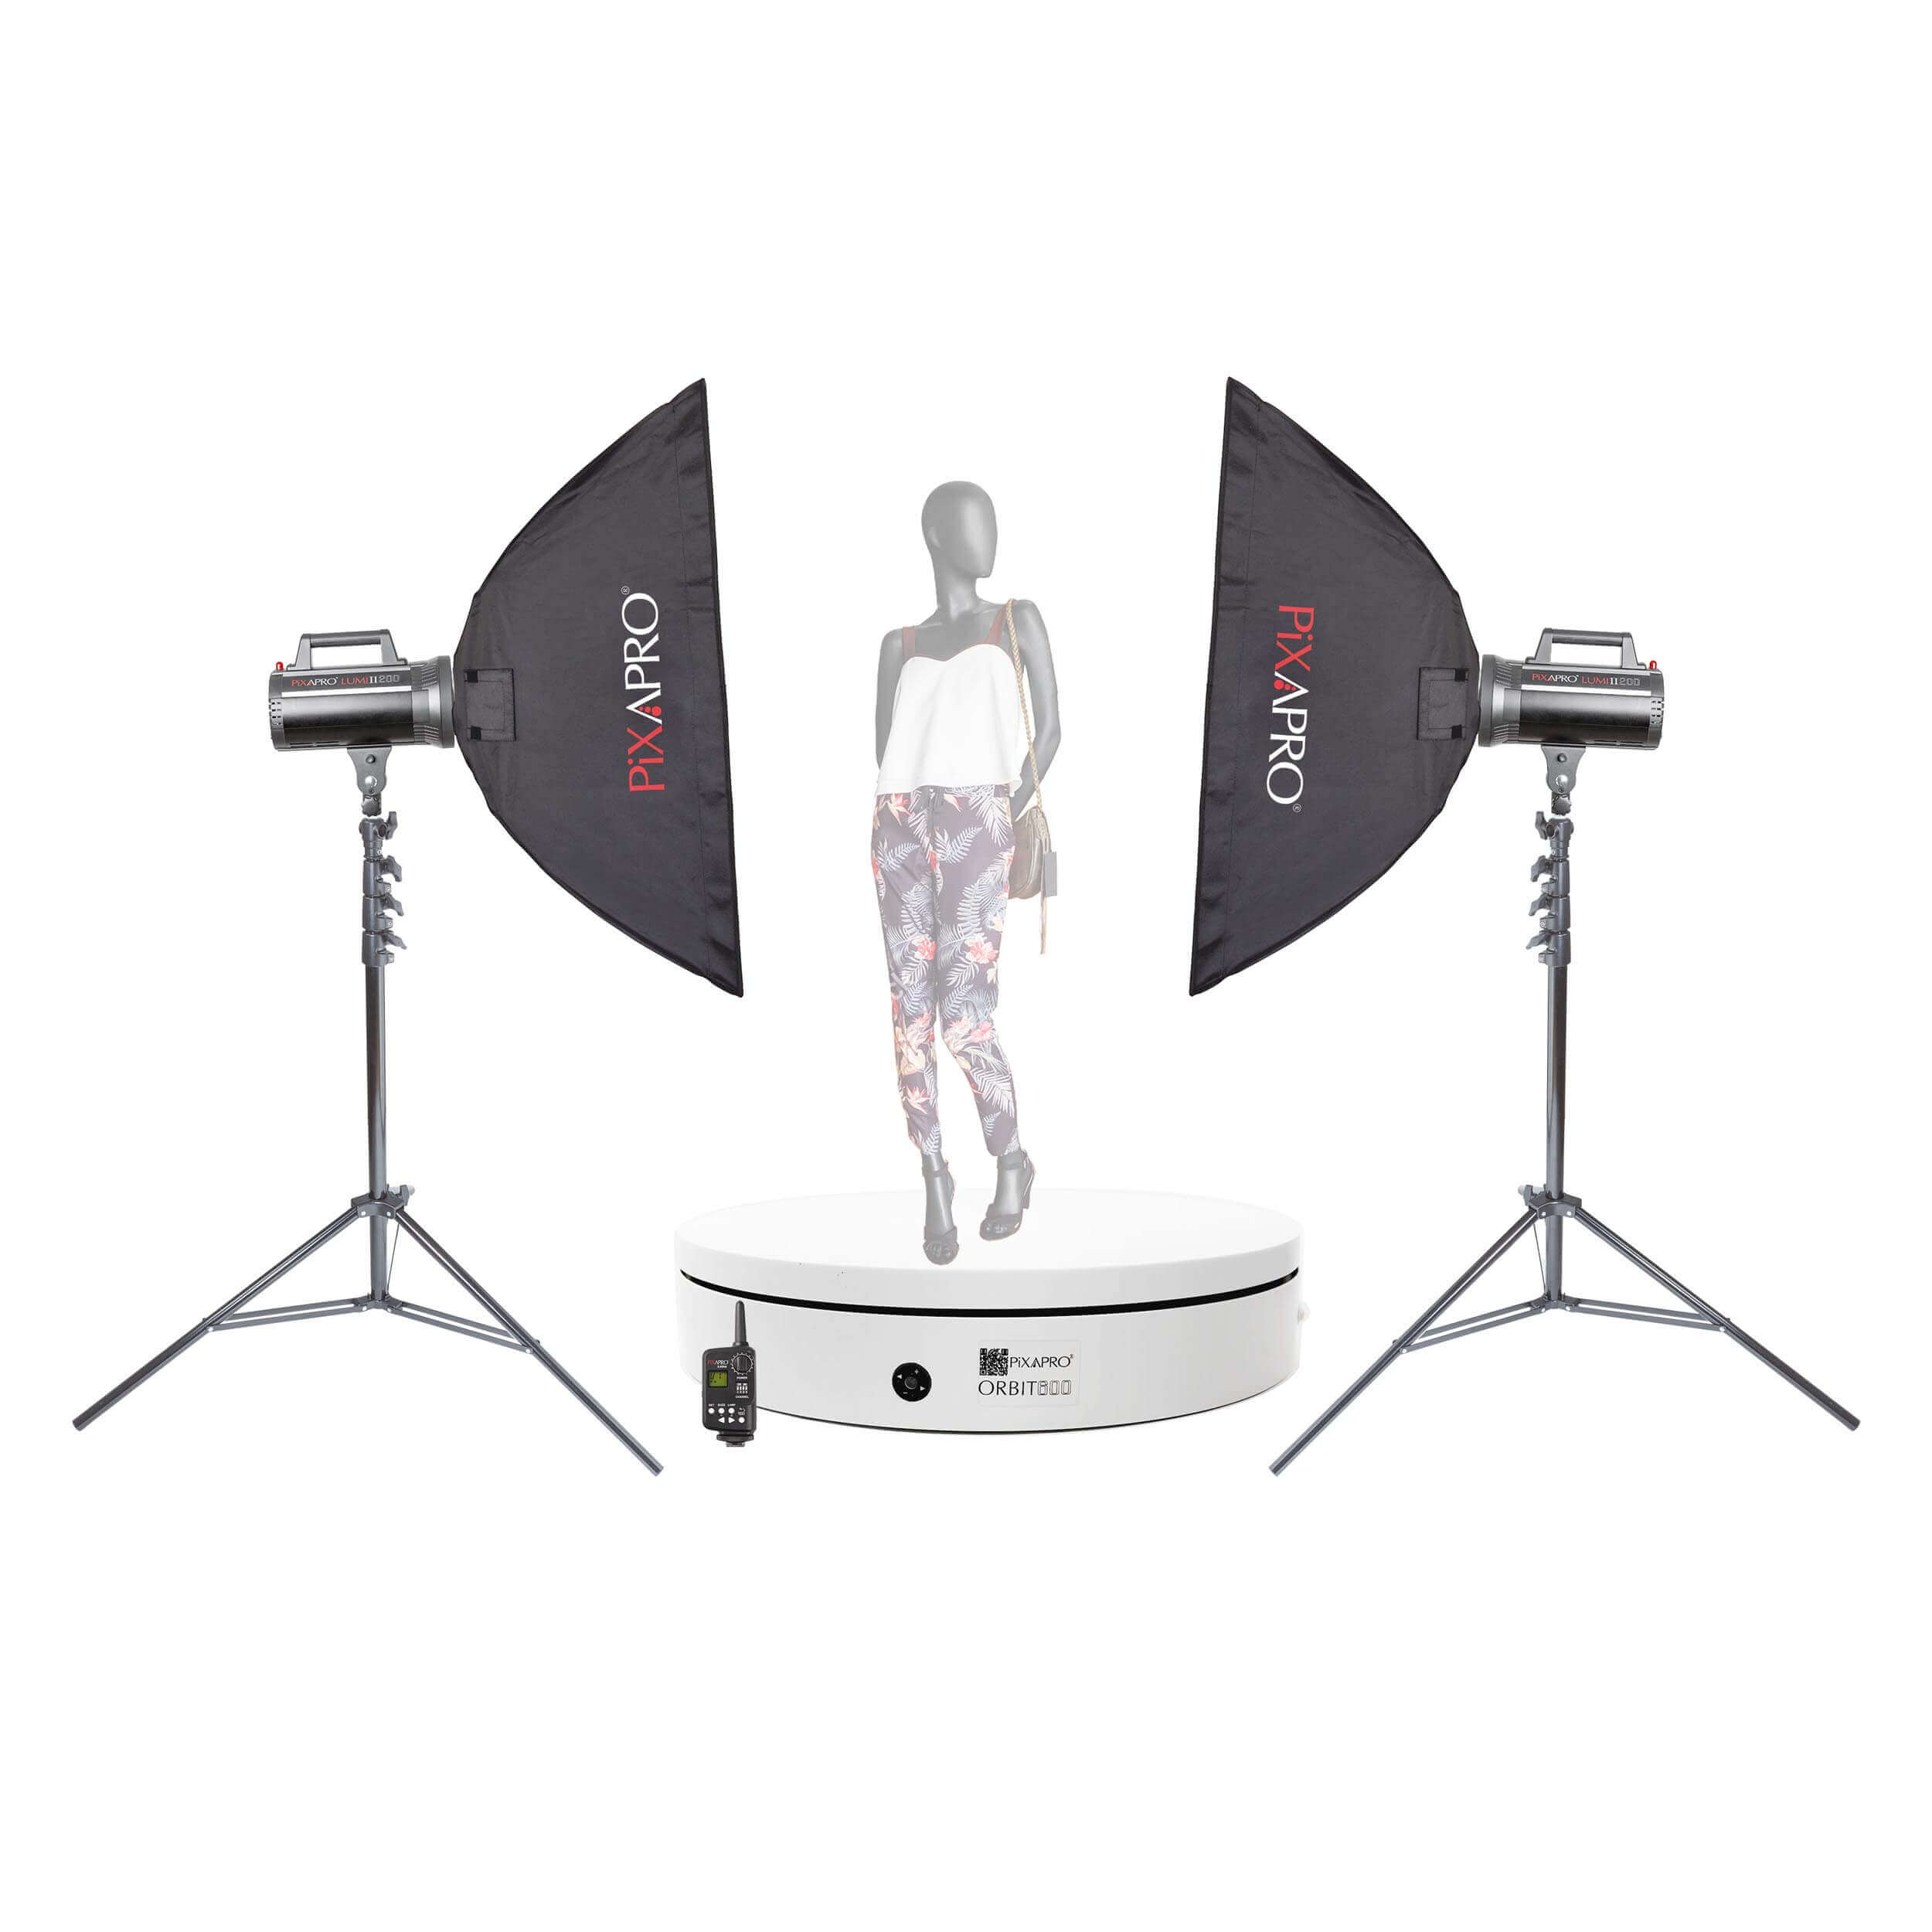 LUMI200II 360 Product Photography Product Spin Systems Rotating Lighting Kit